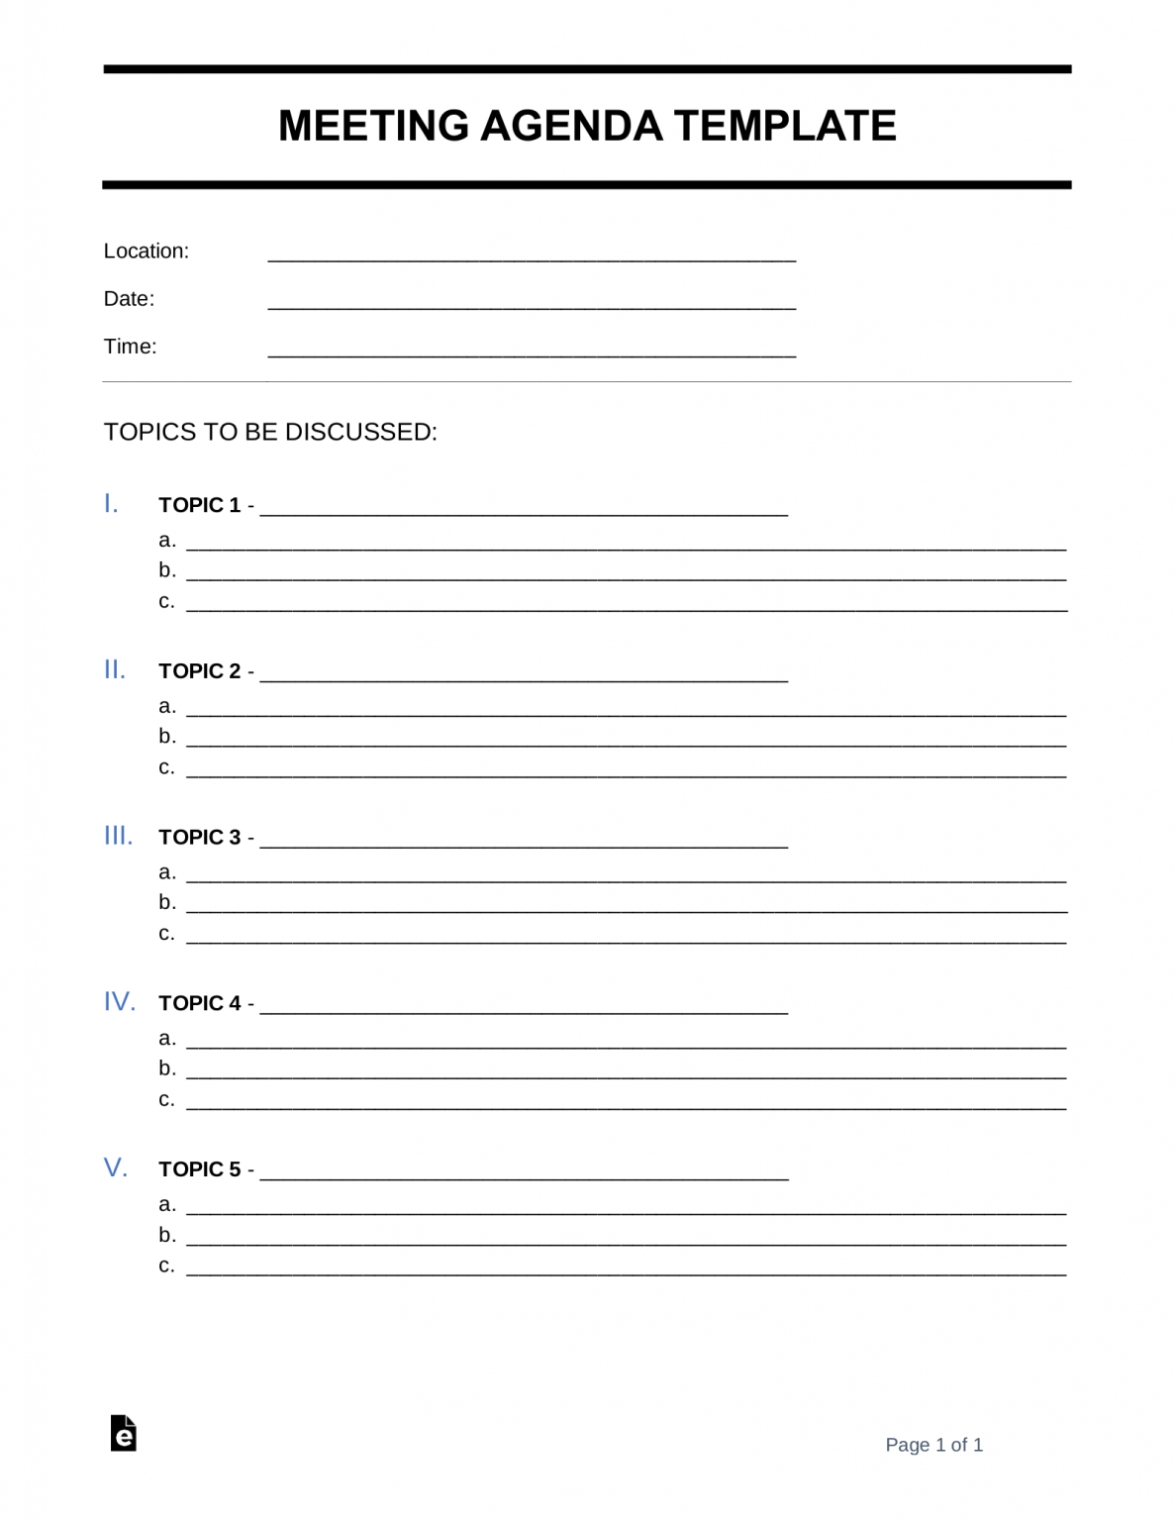 Free Meeting Agenda Template | Sample - Word | Pdf - Eforms Pertaining To Meeting Minutes Template Microsoft Word